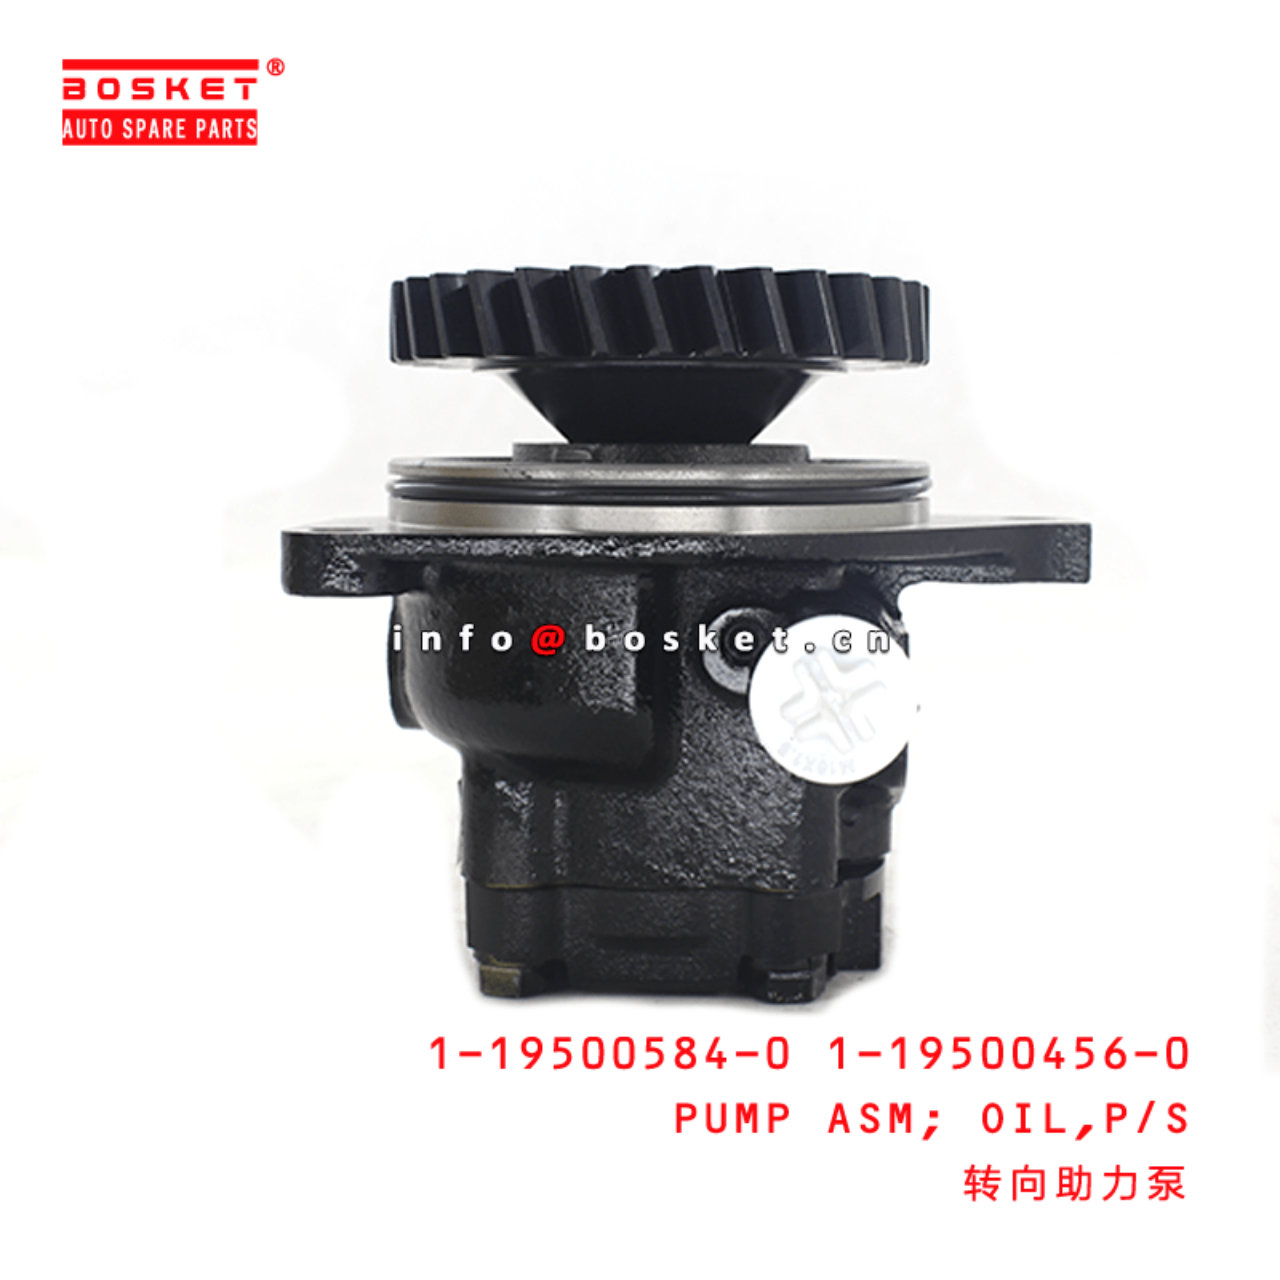 1-19500584-0 1-19500456-0 Power Steering Oil Pump Assembly 1195005840 1195004560 Suitable for ISUZU 